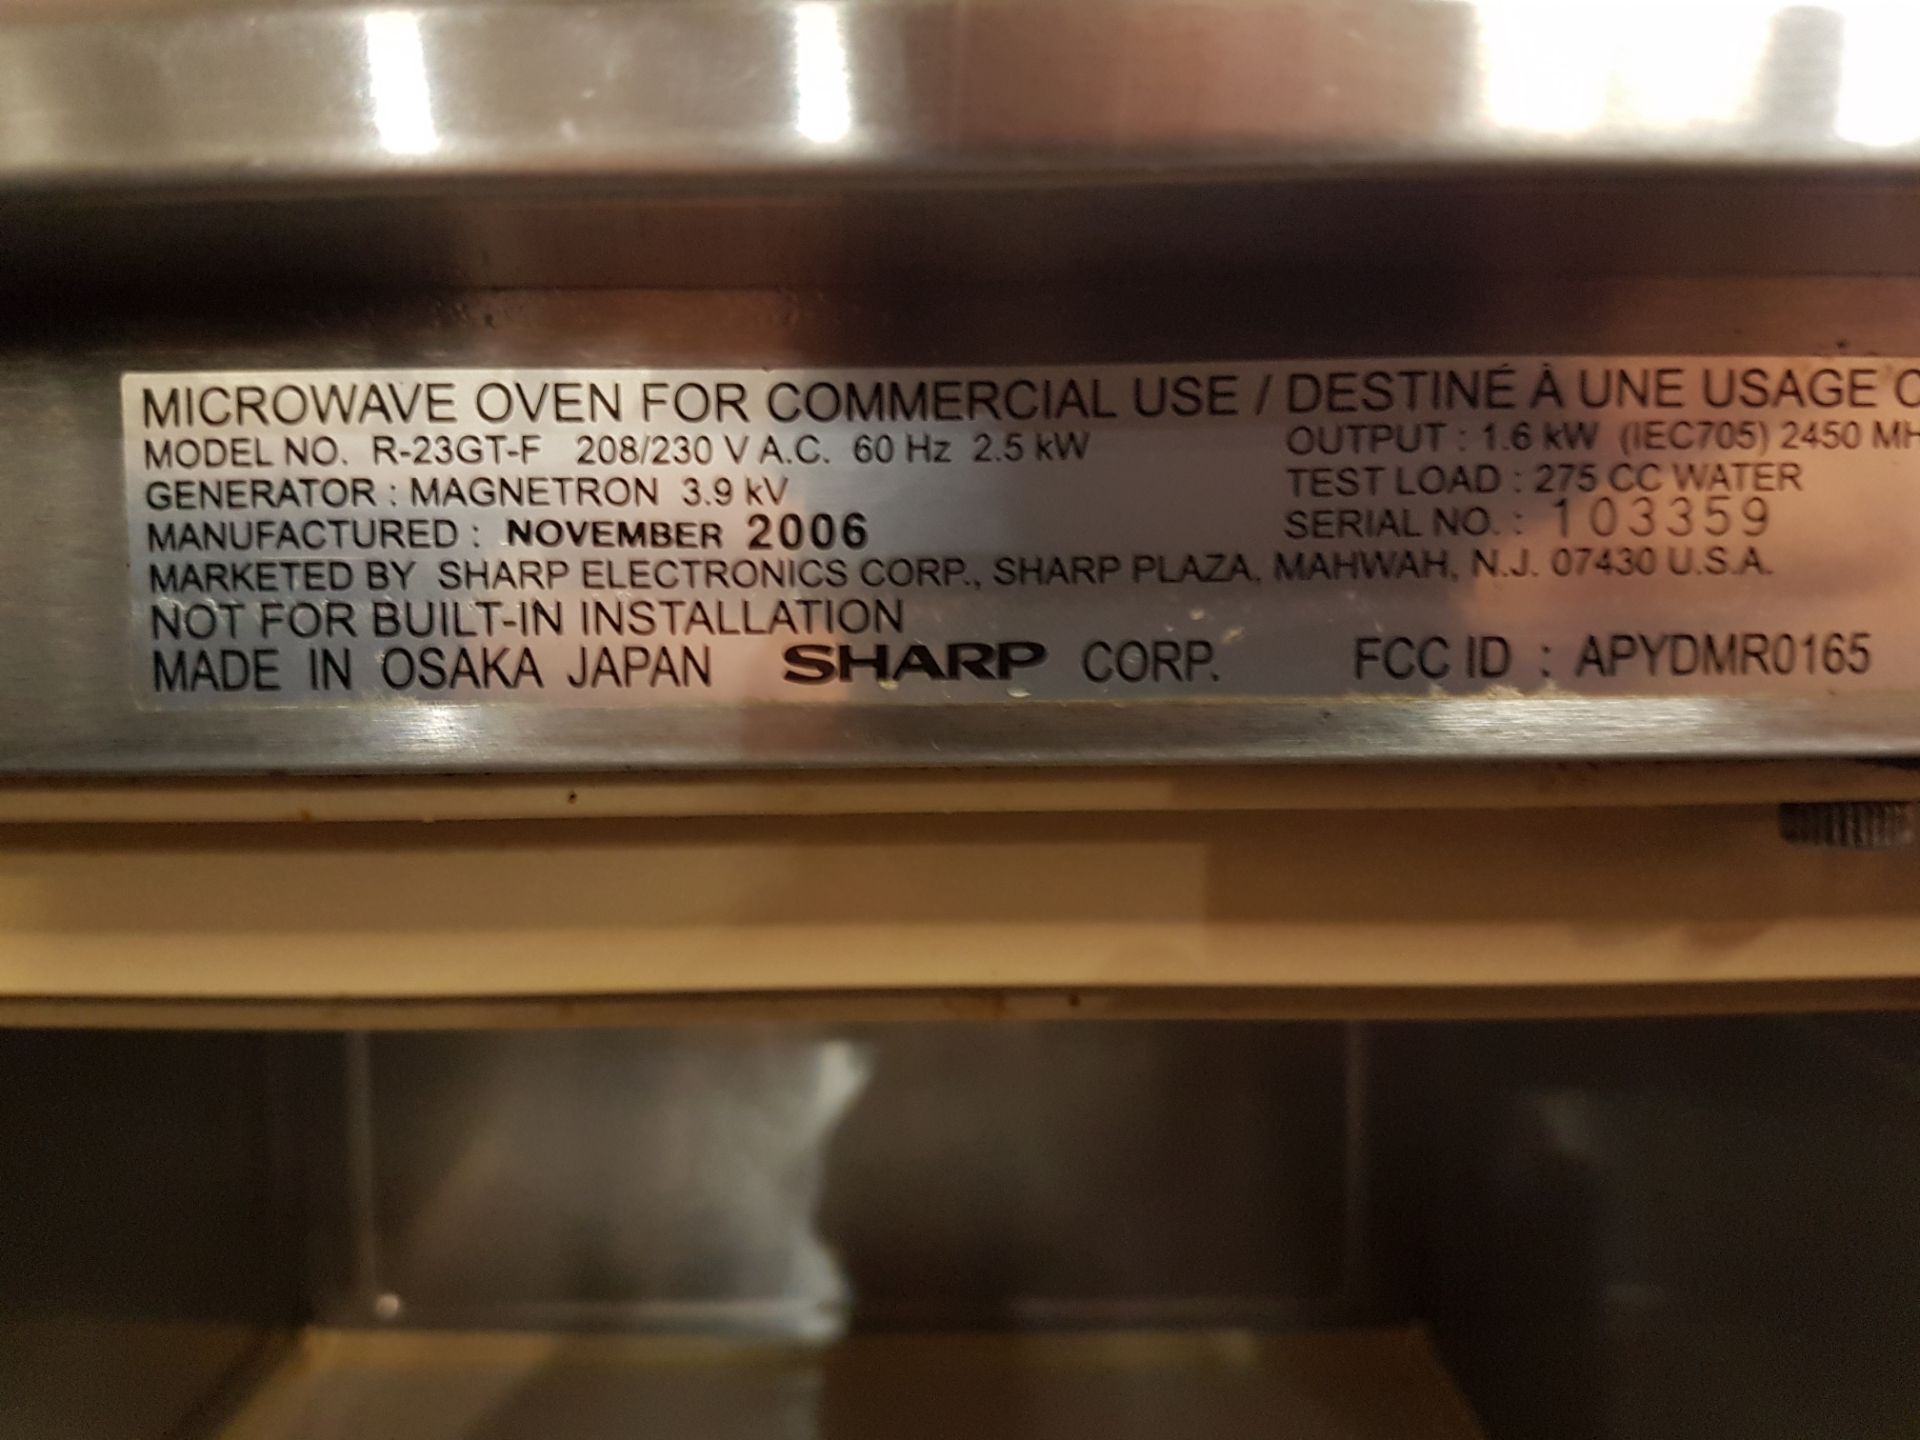 Sharp Commercial Microwave - Model R-23GT-F - Image 3 of 3